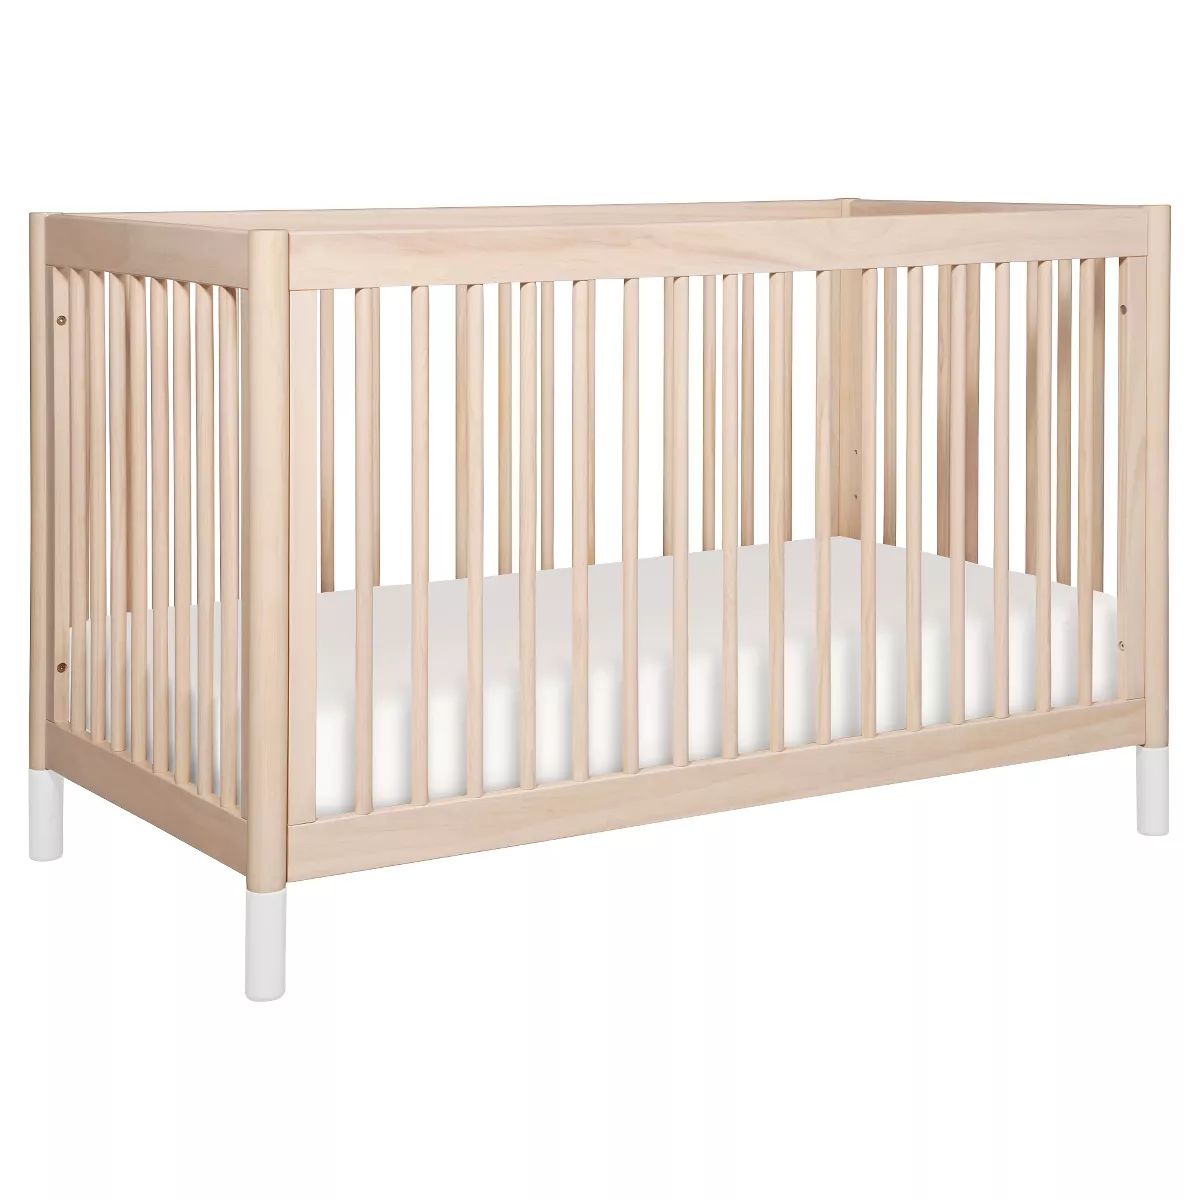 Babyletto Gelato 4-in-1 Convertible Crib - Washed Natural | Target